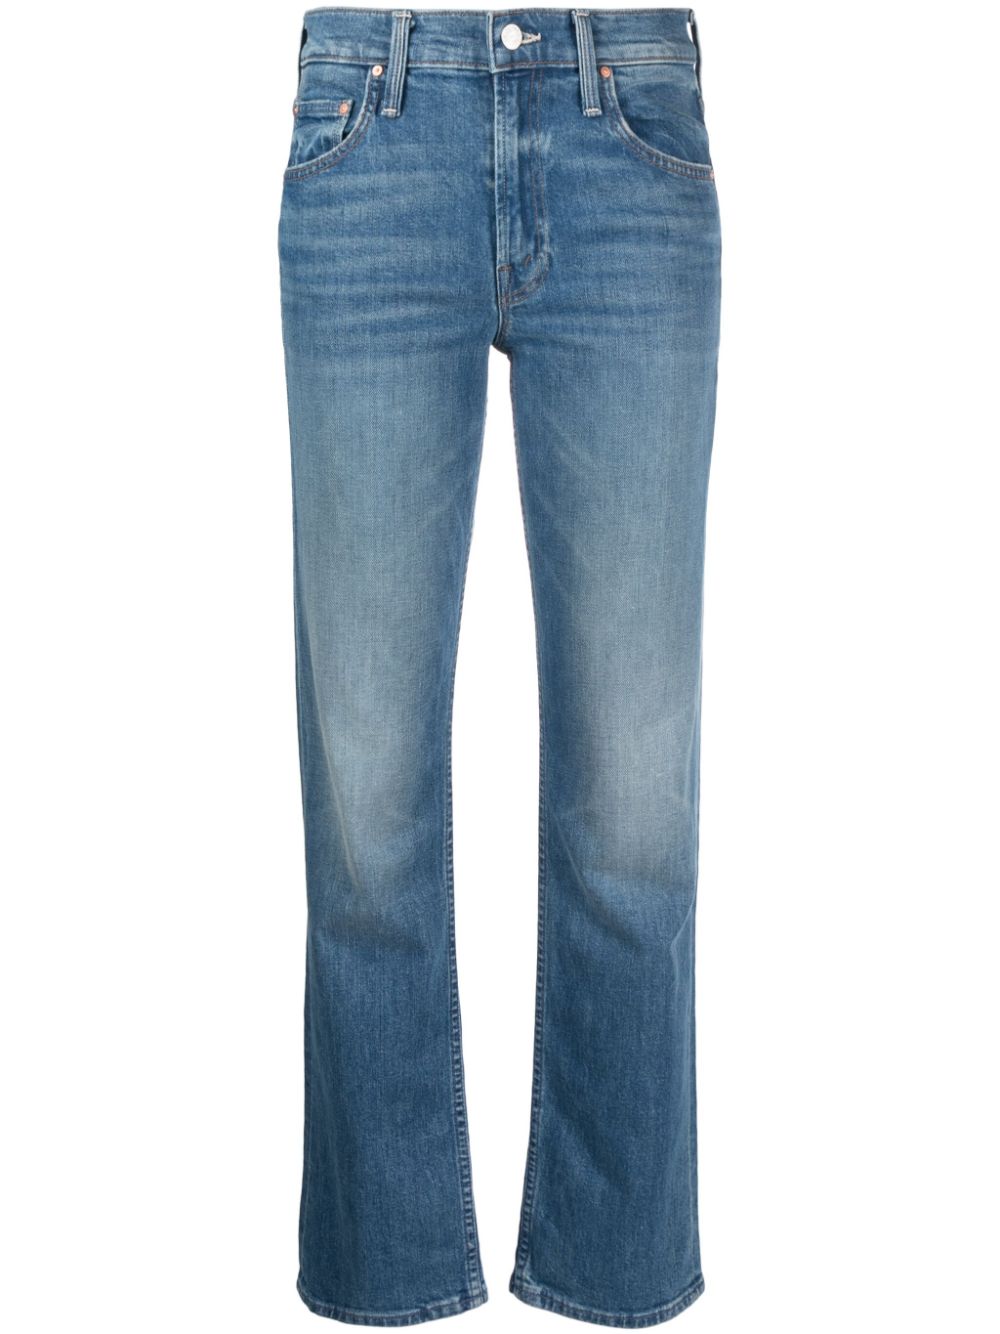 The Smarty Pants high-rise straight-leg jeans